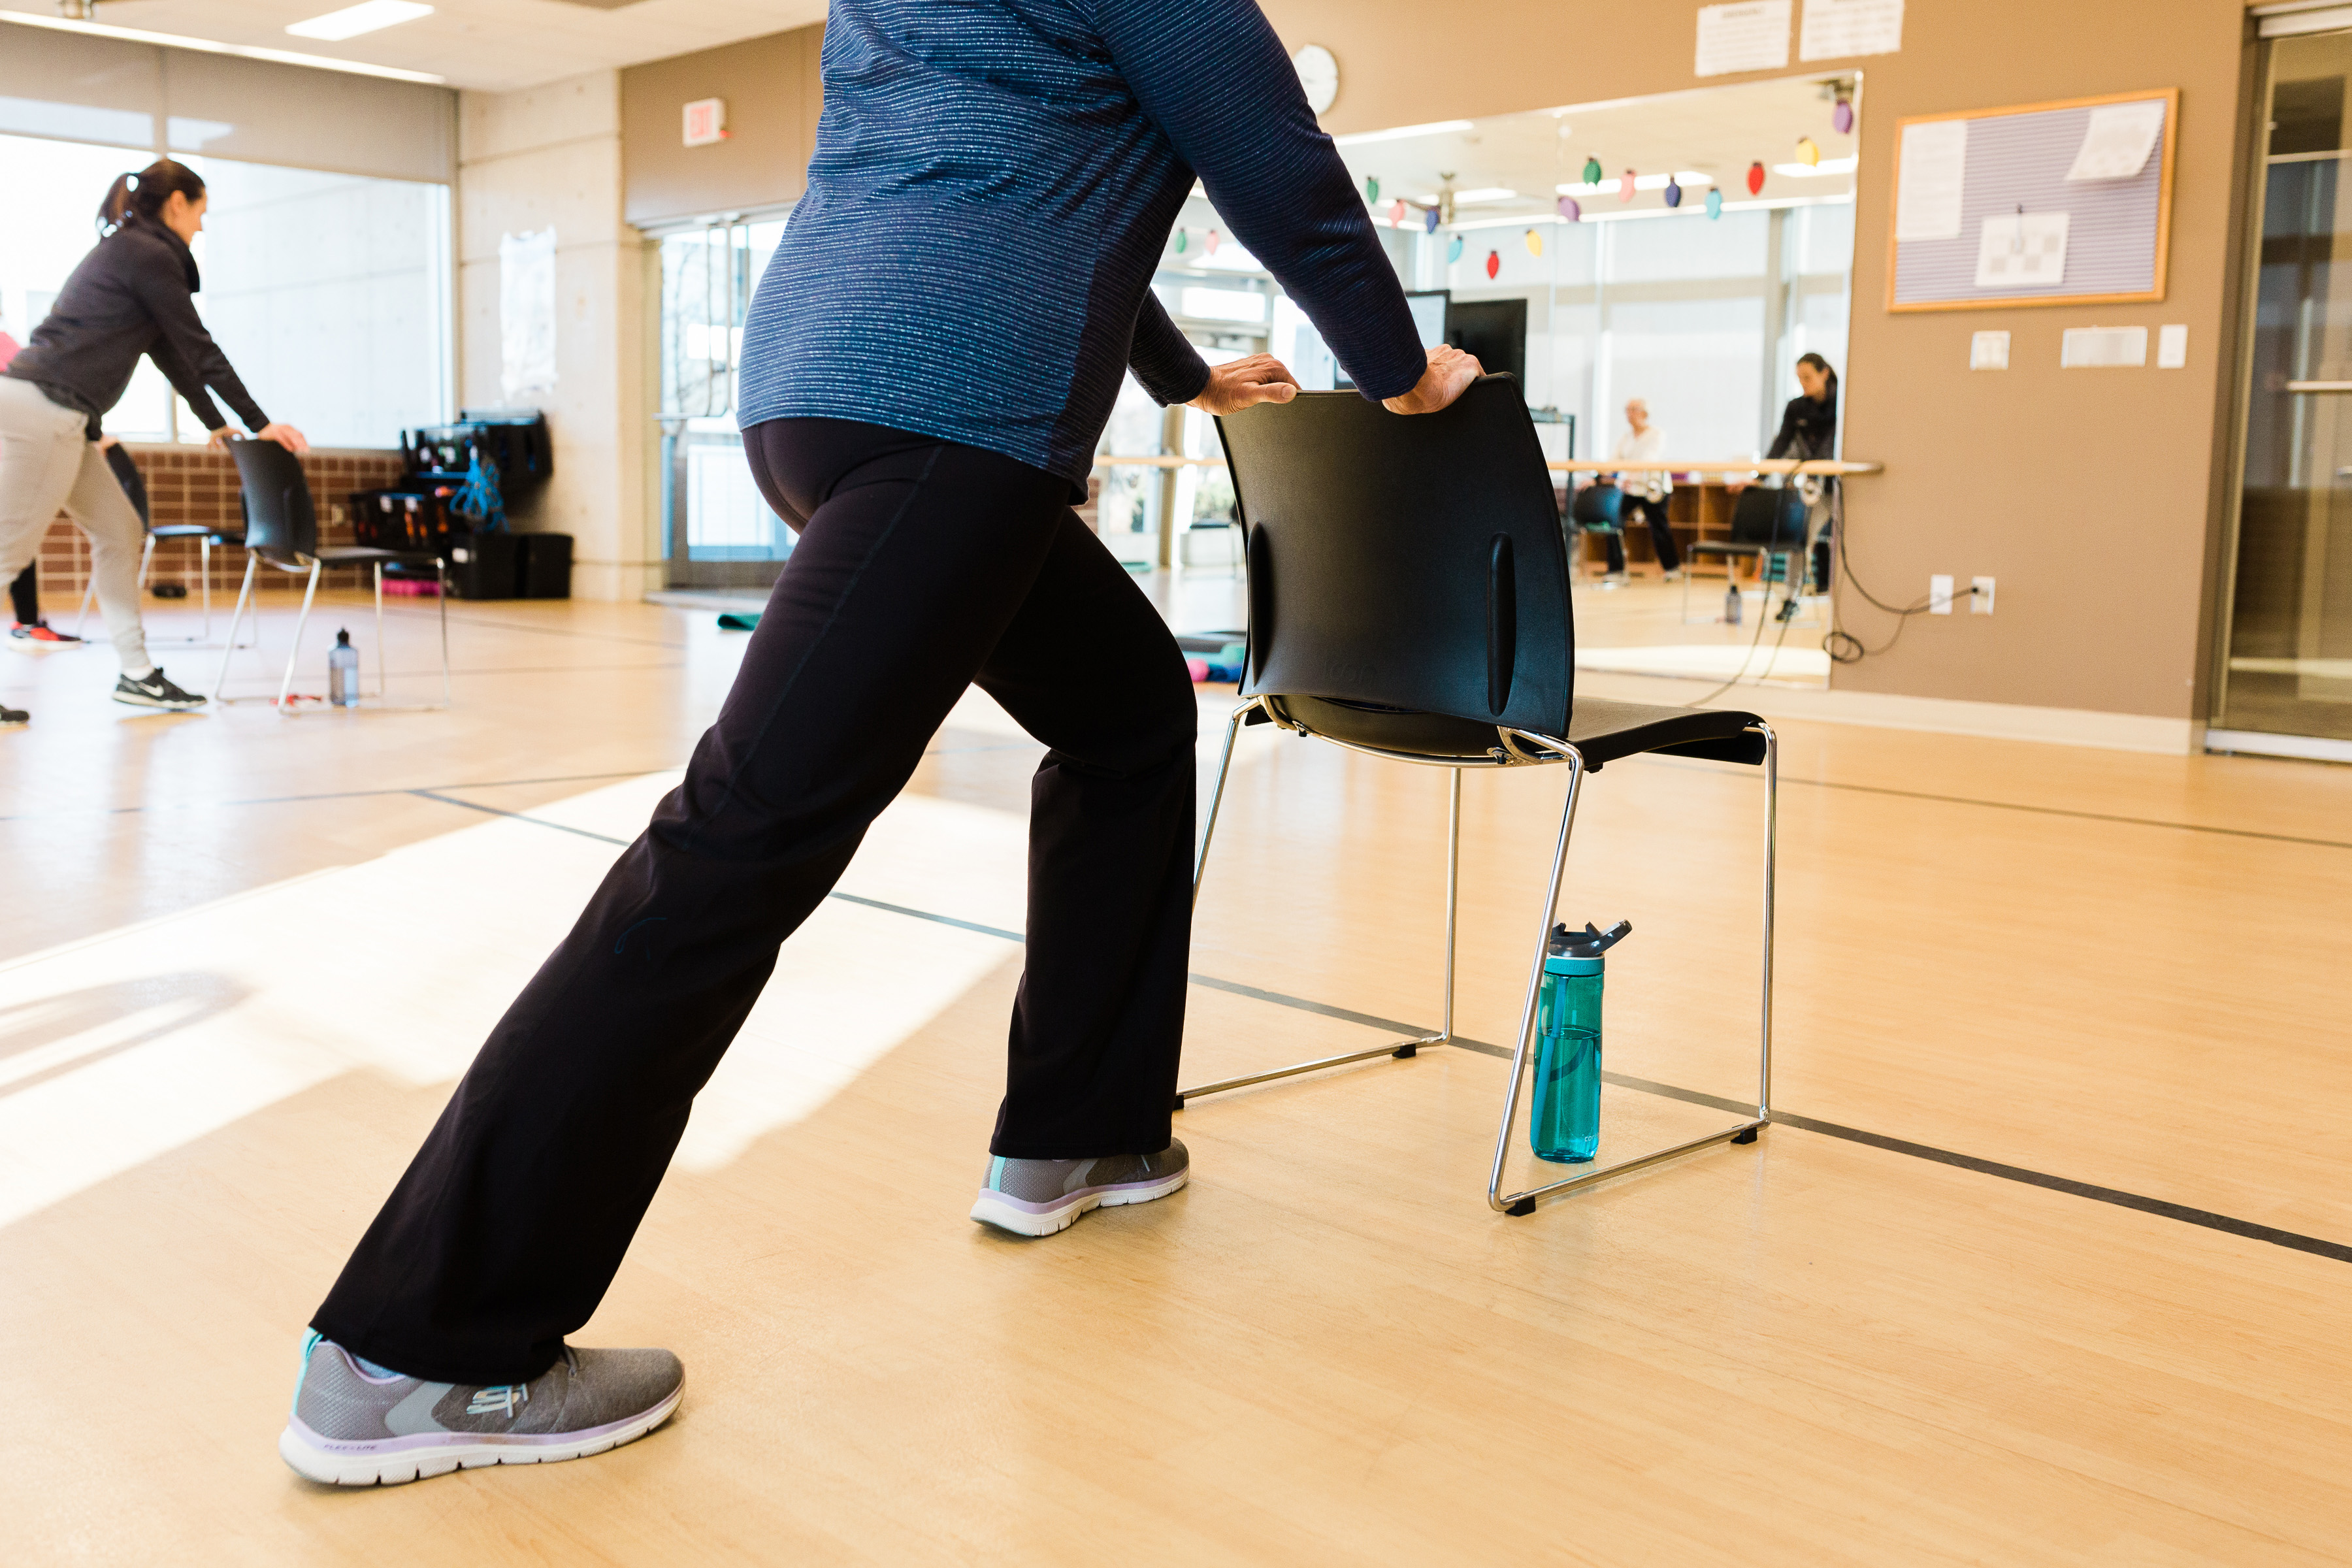 A participant takes part in an instructor-led group movement class at UNMC's Engage Wellness.